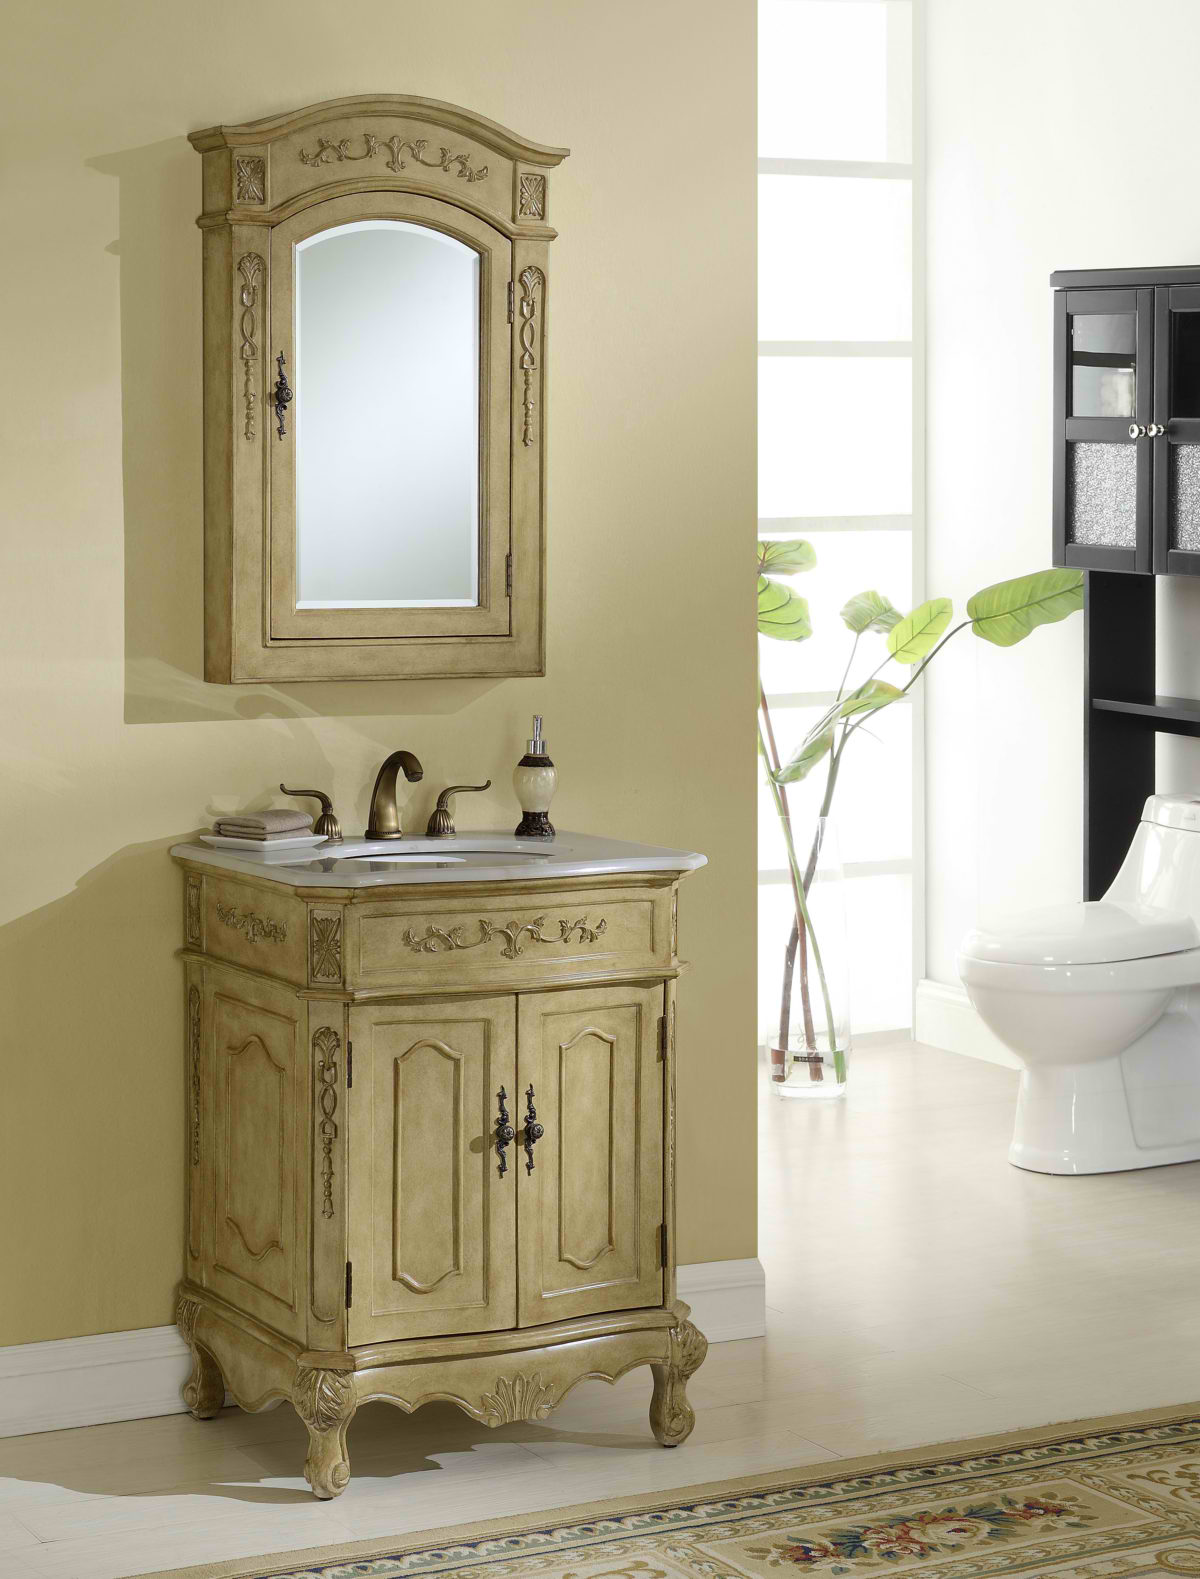 27" Antique Tan Finish Vanity with Mirror, Med Cab, and Linen Cabinet Options